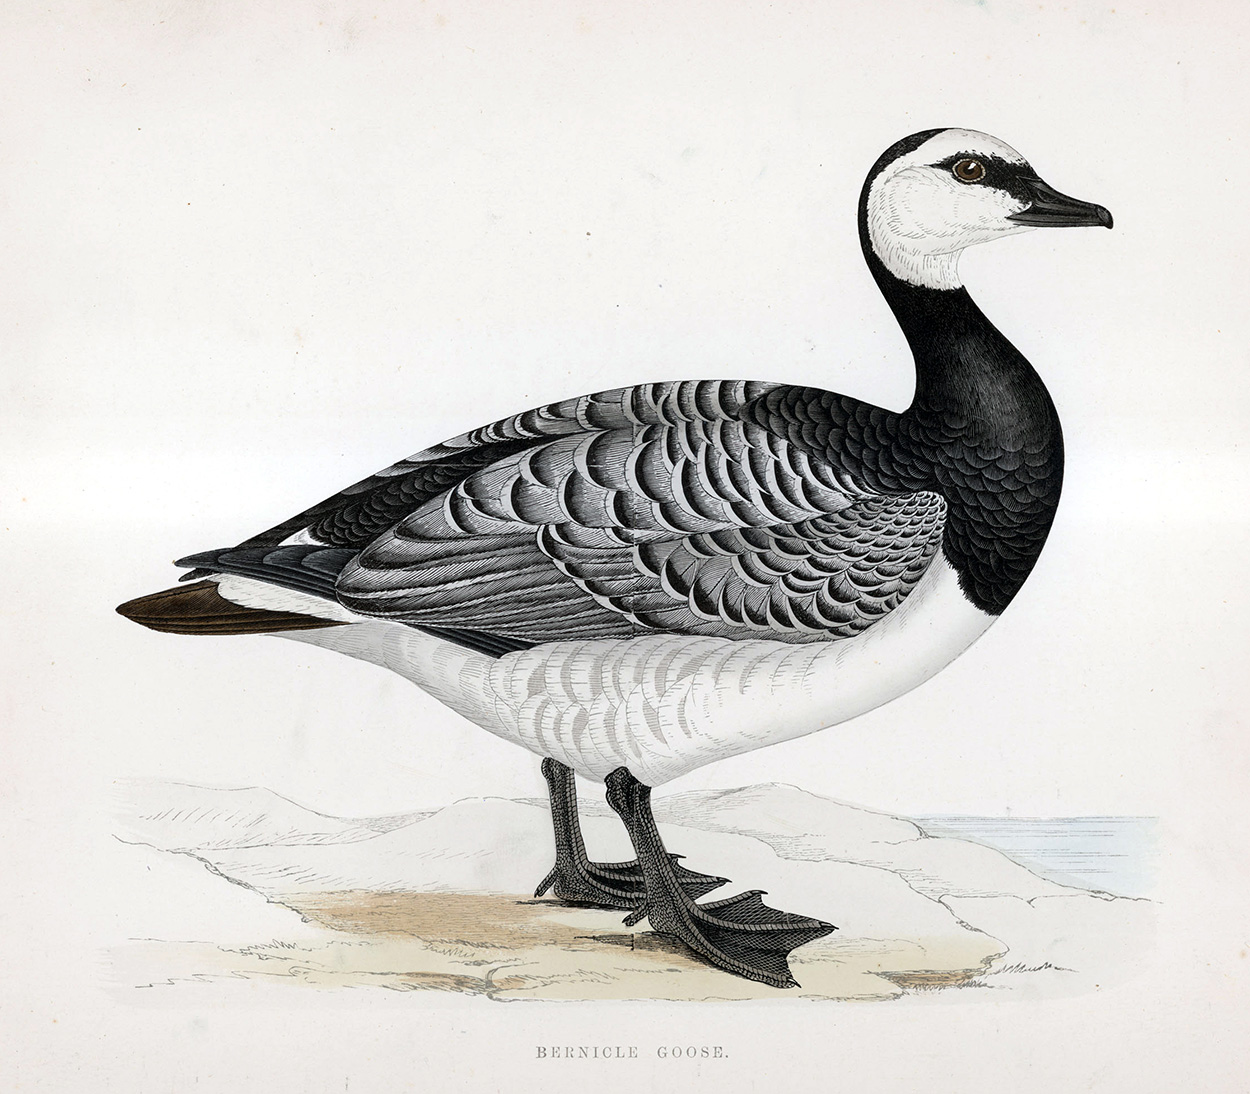 Bernicle Goose - hand coloured lithograph 1891 (Print) art by Beverley R Morris Art at The Illustration Art Gallery